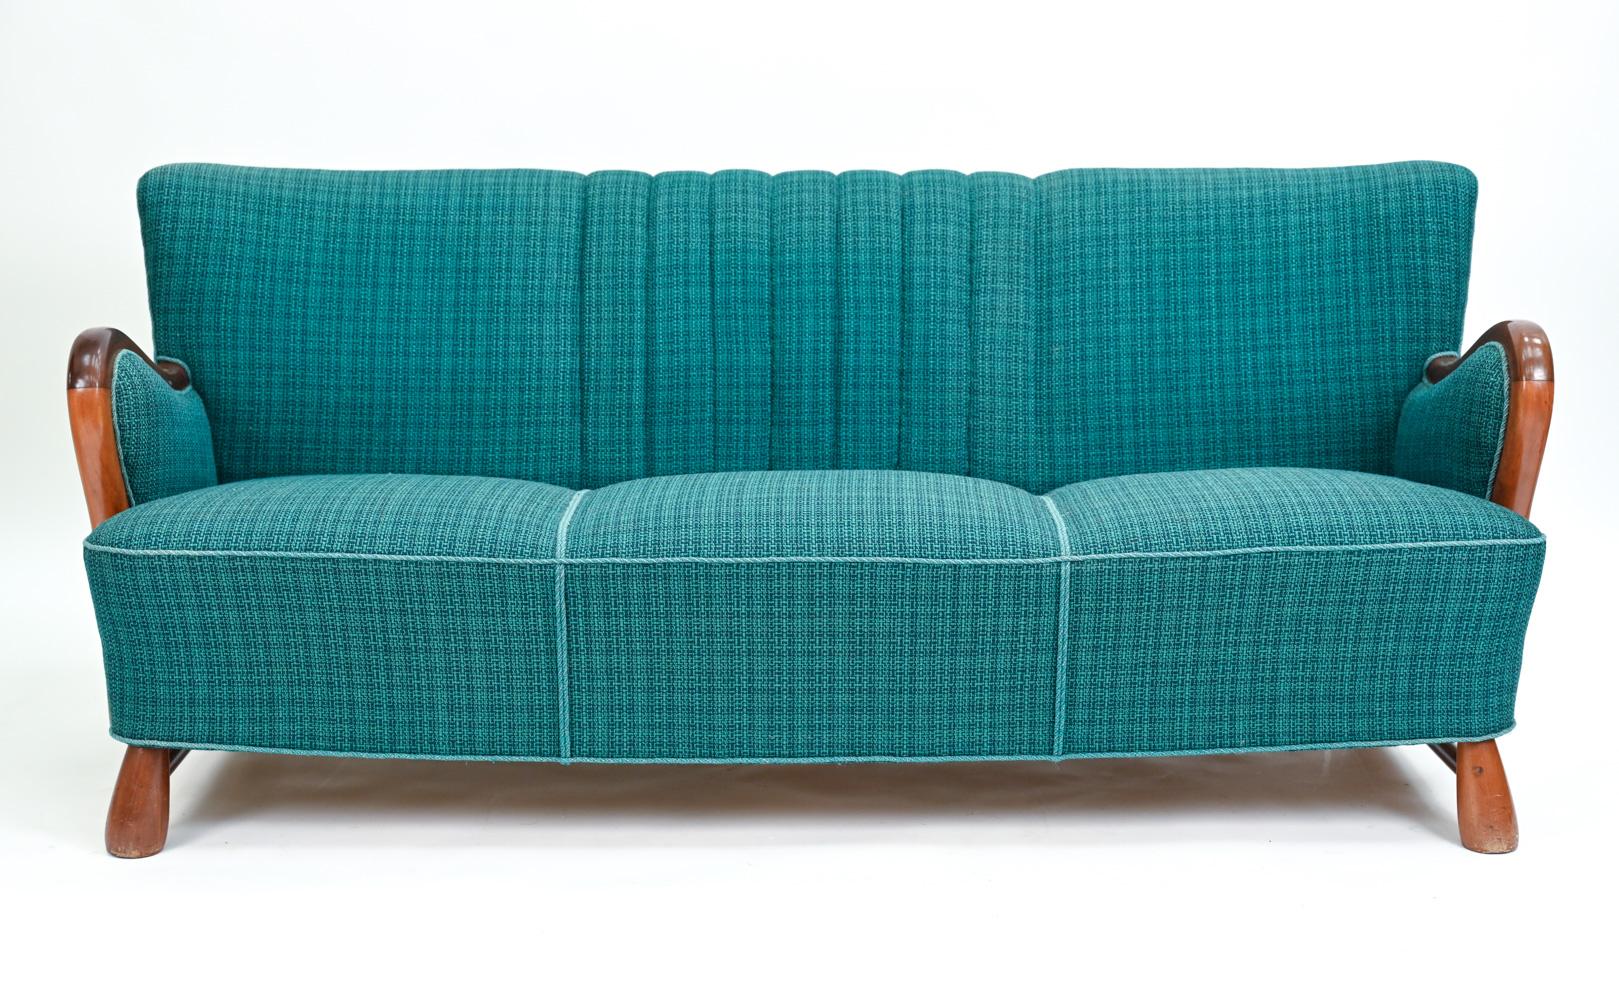 A handsome and comfortable Danish Art Deco period sofa attributed to Otto Faerge, of quality design and construction. Featuring a mahogany frame with flared arms, a slight wingback design, and teal wool tweed upholstery, channel-stitched at the